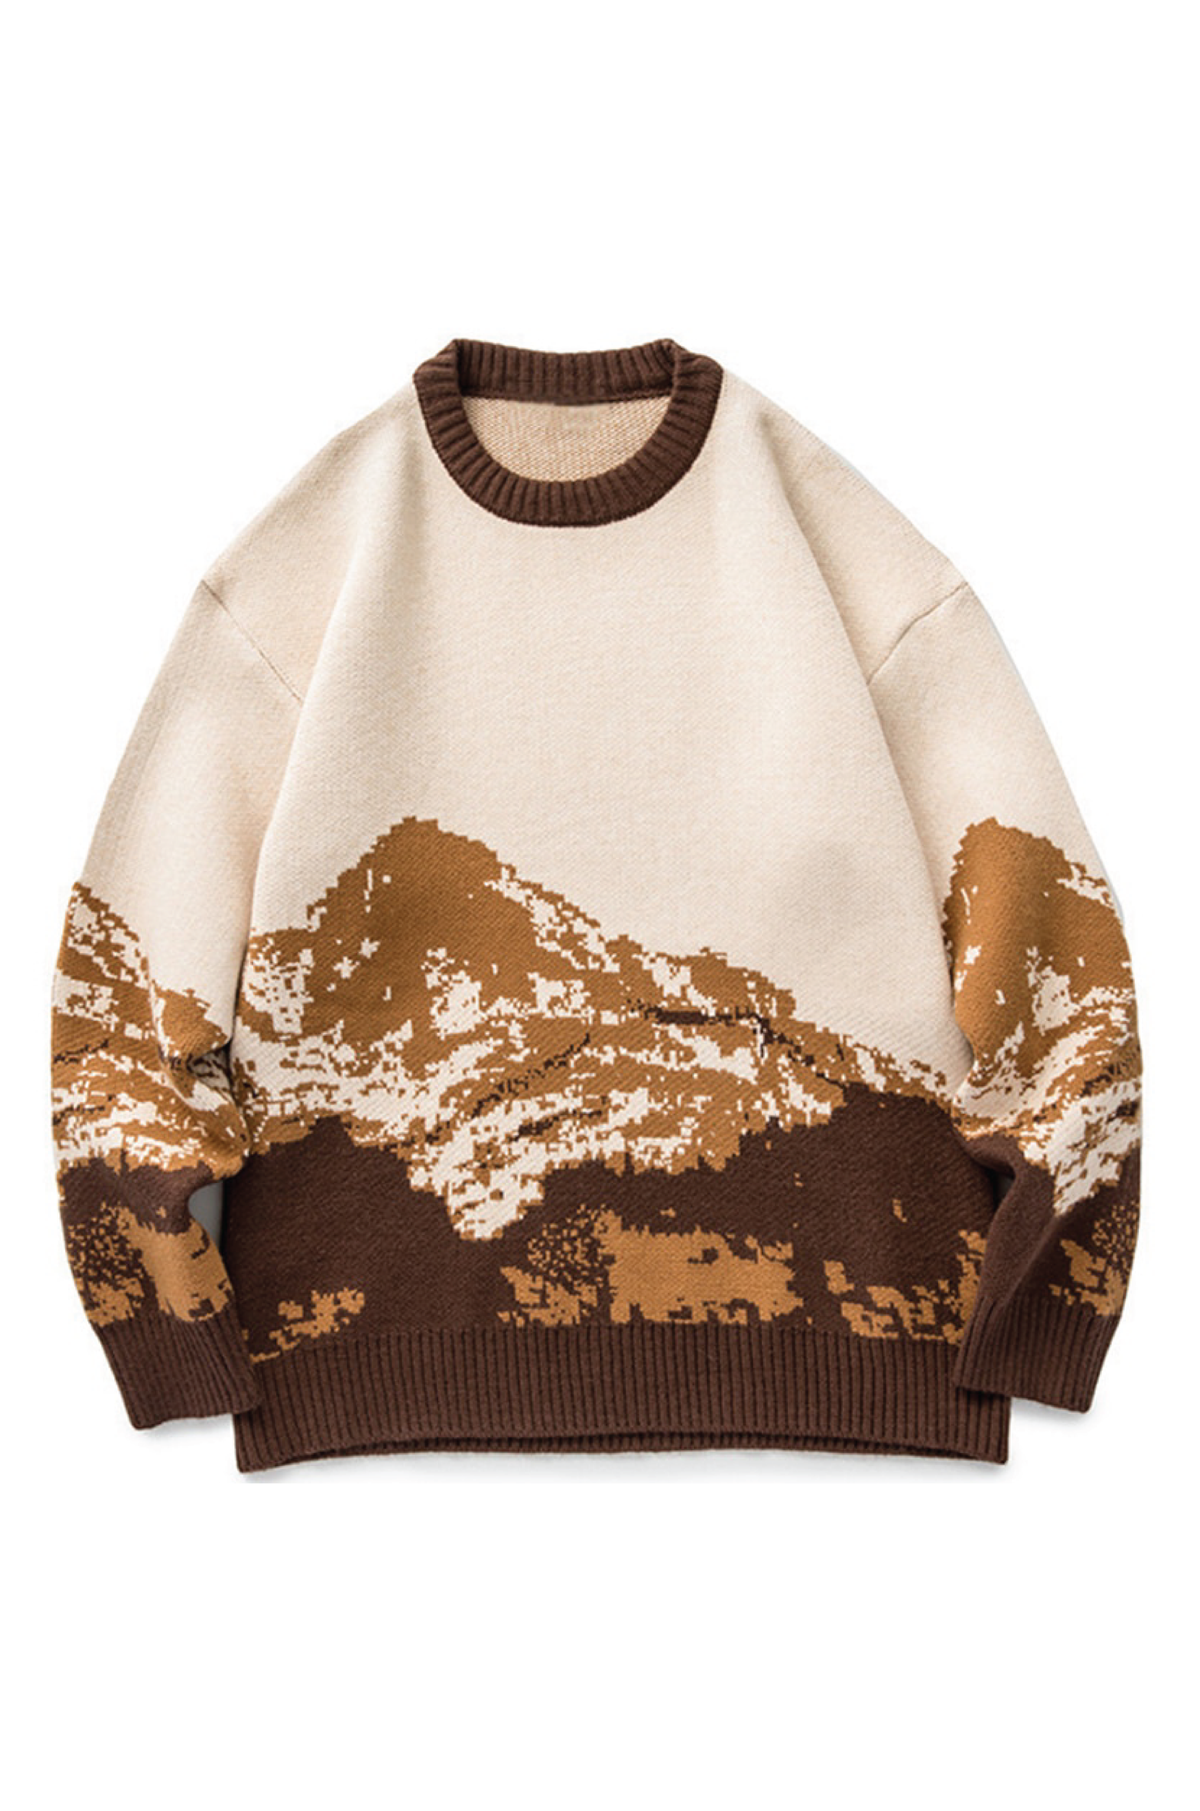 Rocky Mountains Cashmere Men's Sweater | Hypoallergenic - Allergy Friendly - Naturally Free